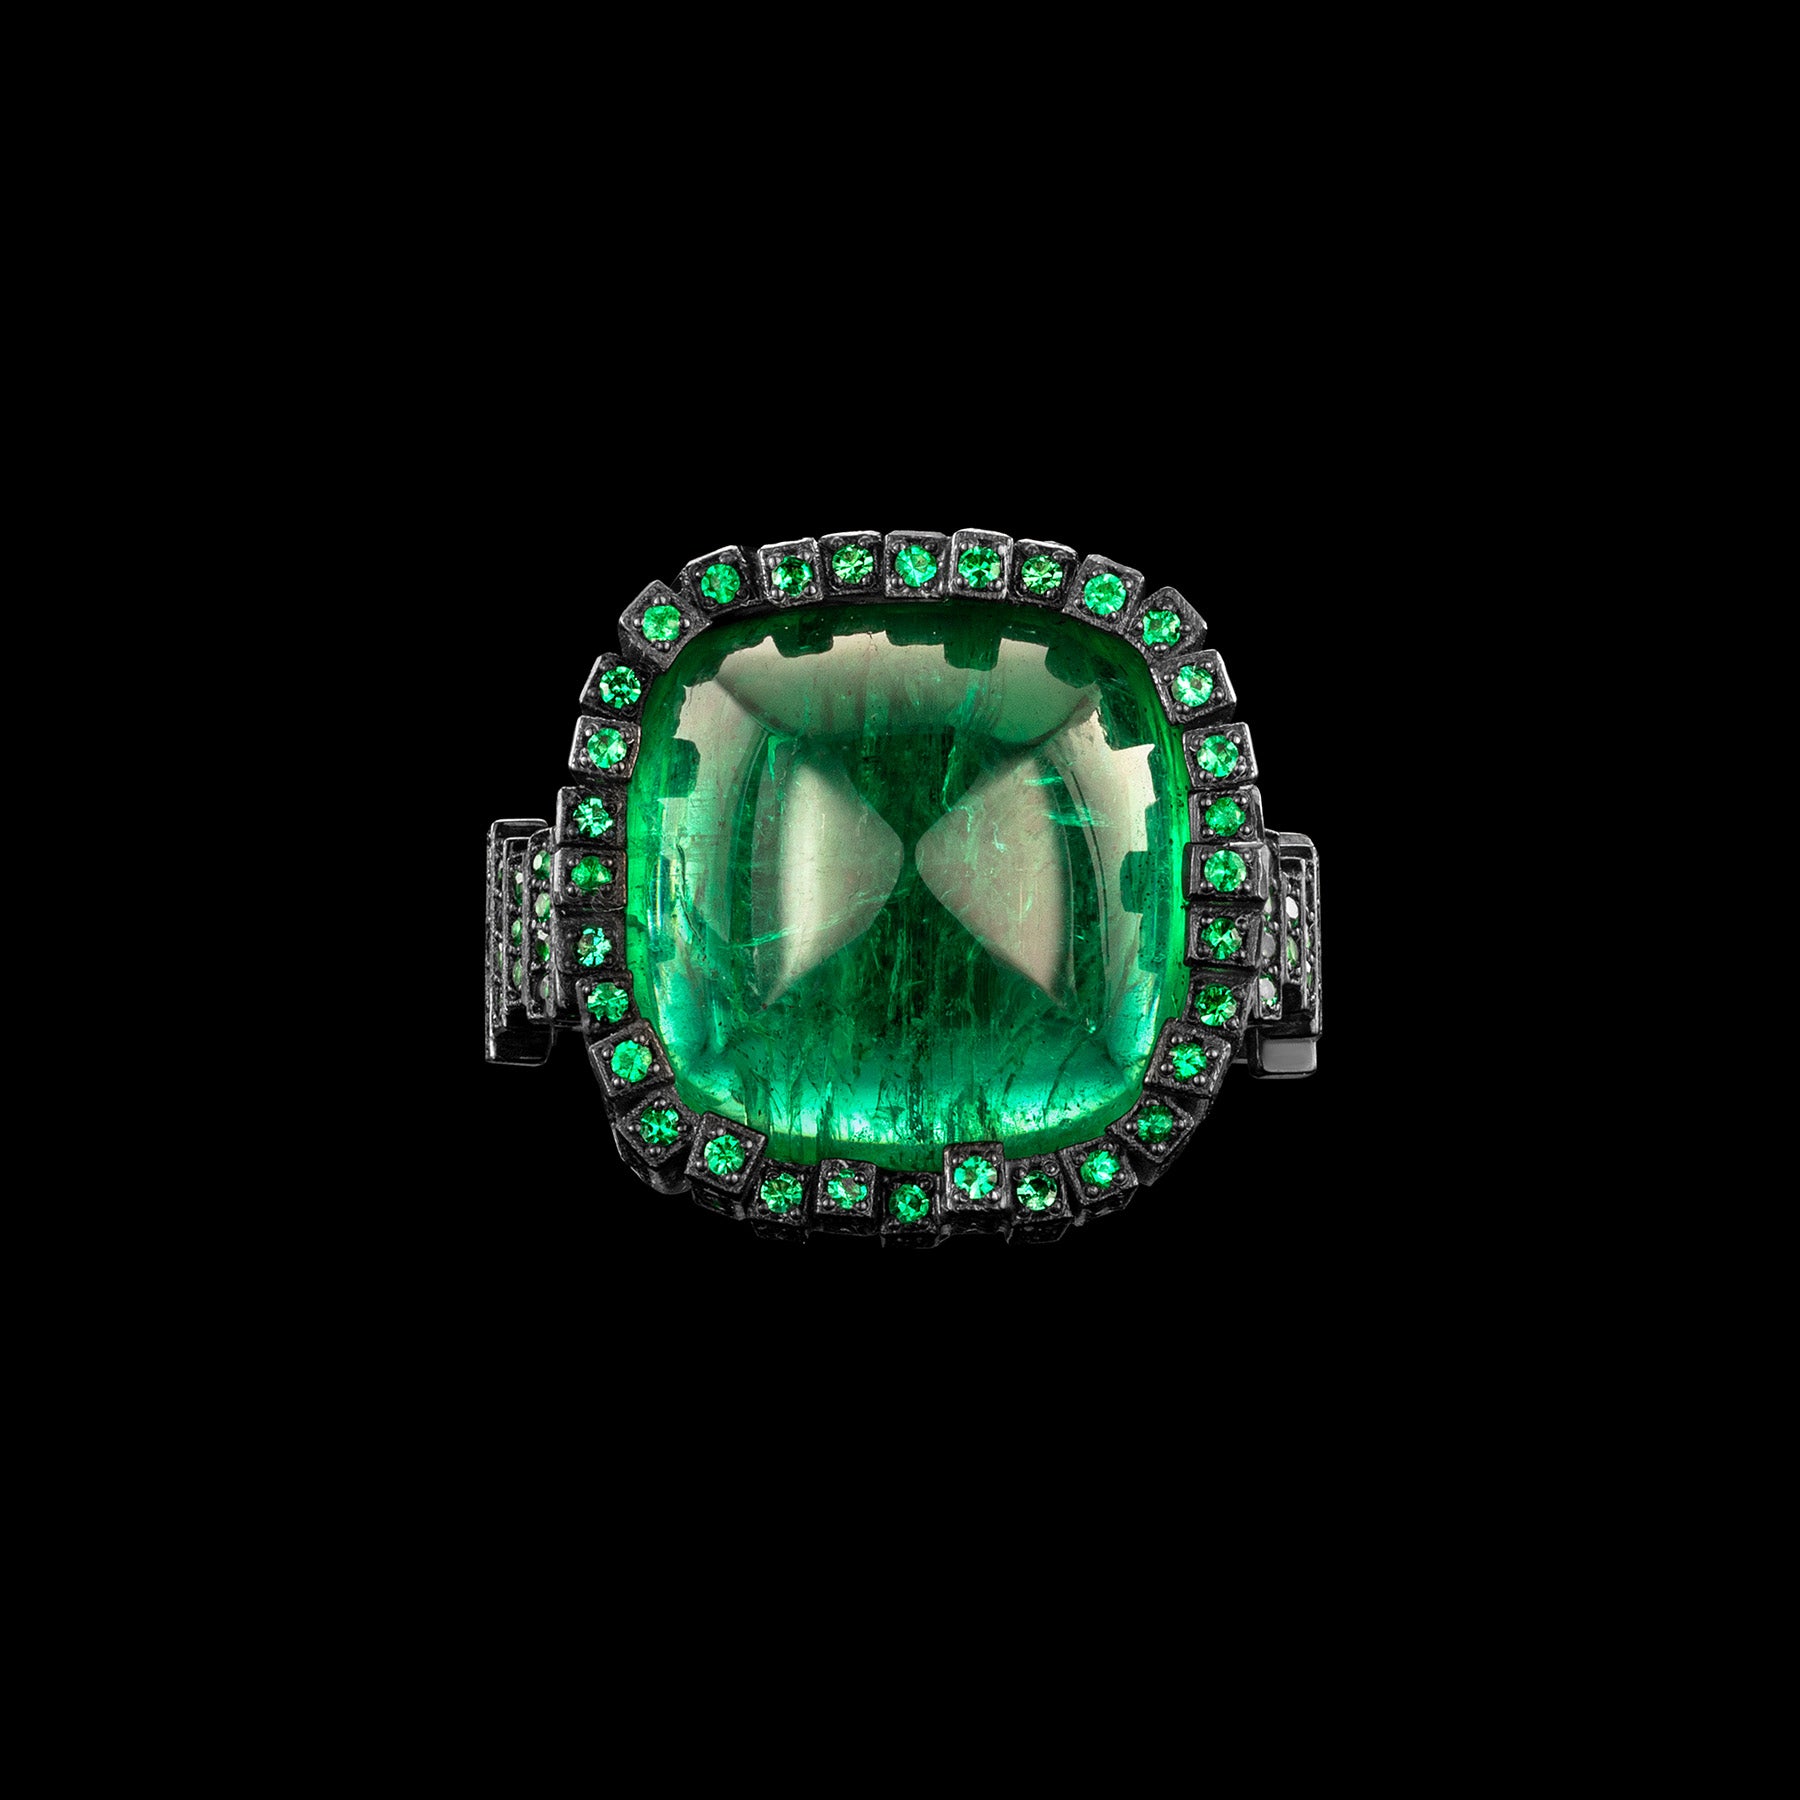 The Viridian Ring by designer Solange Azagury-Partridge - Blackened 18 carat White Gold and Emeralds - front view 1